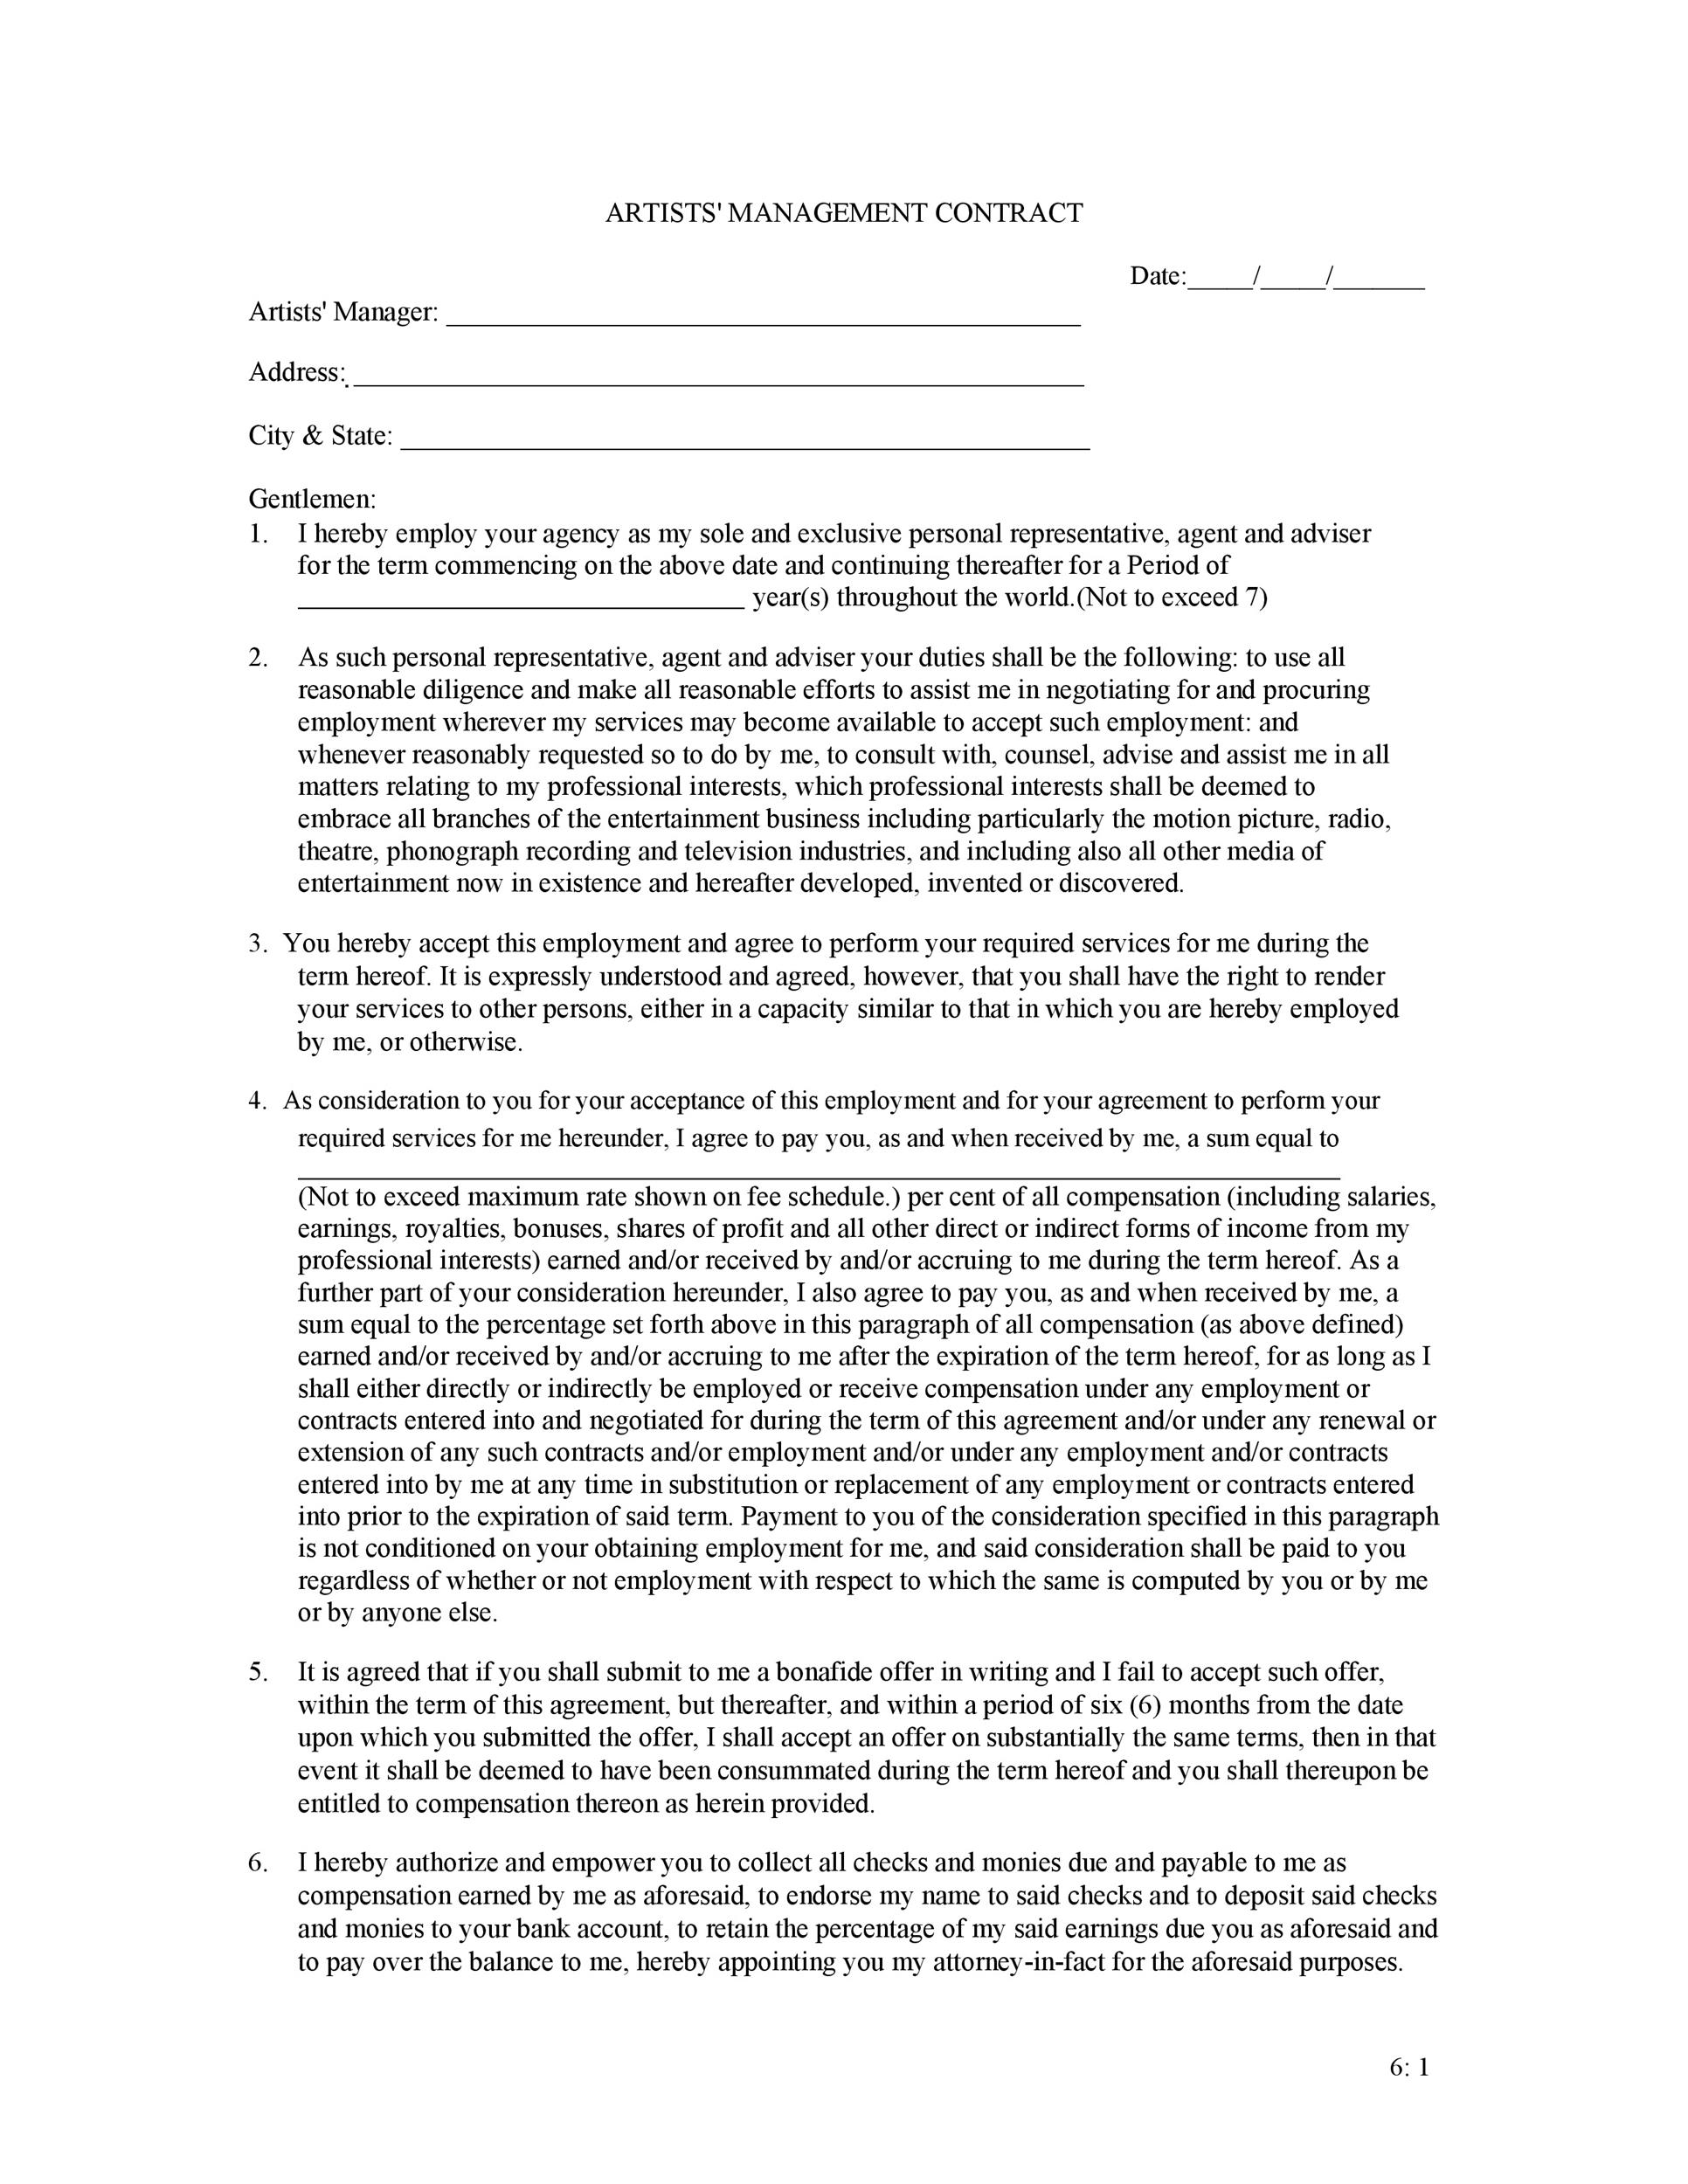 Artist Management Contract Template from templatelab.com